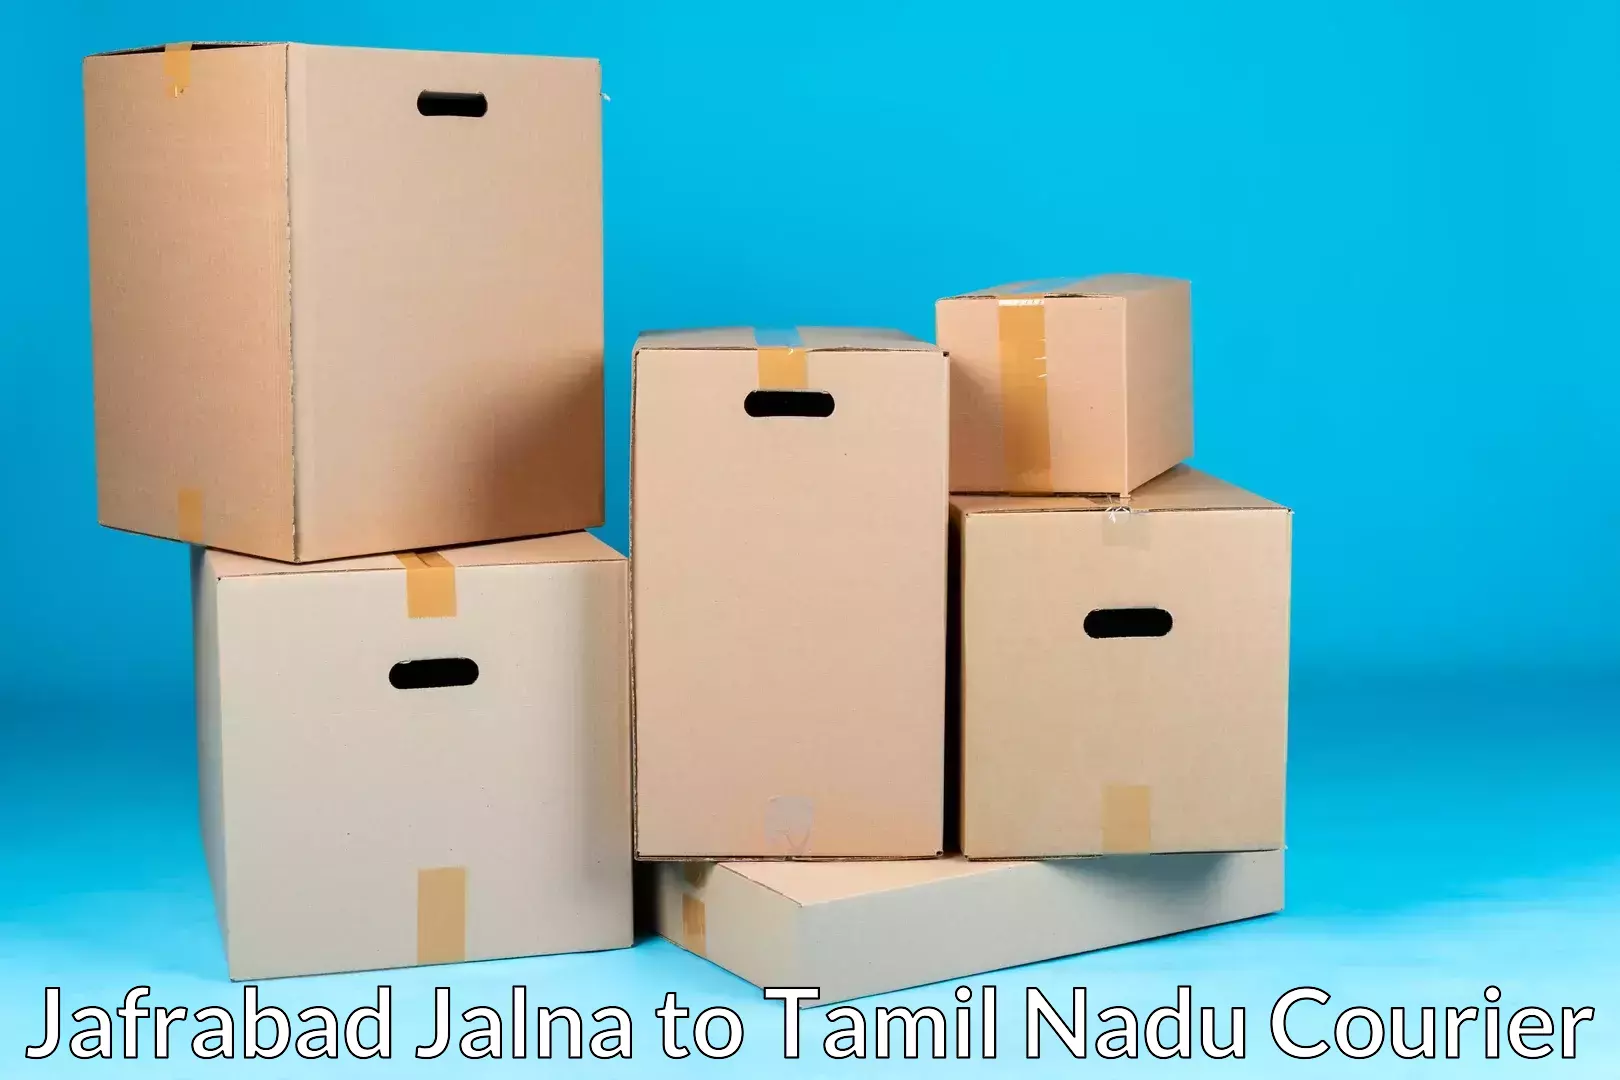 Customized relocation services in Jafrabad Jalna to Kovilpatti